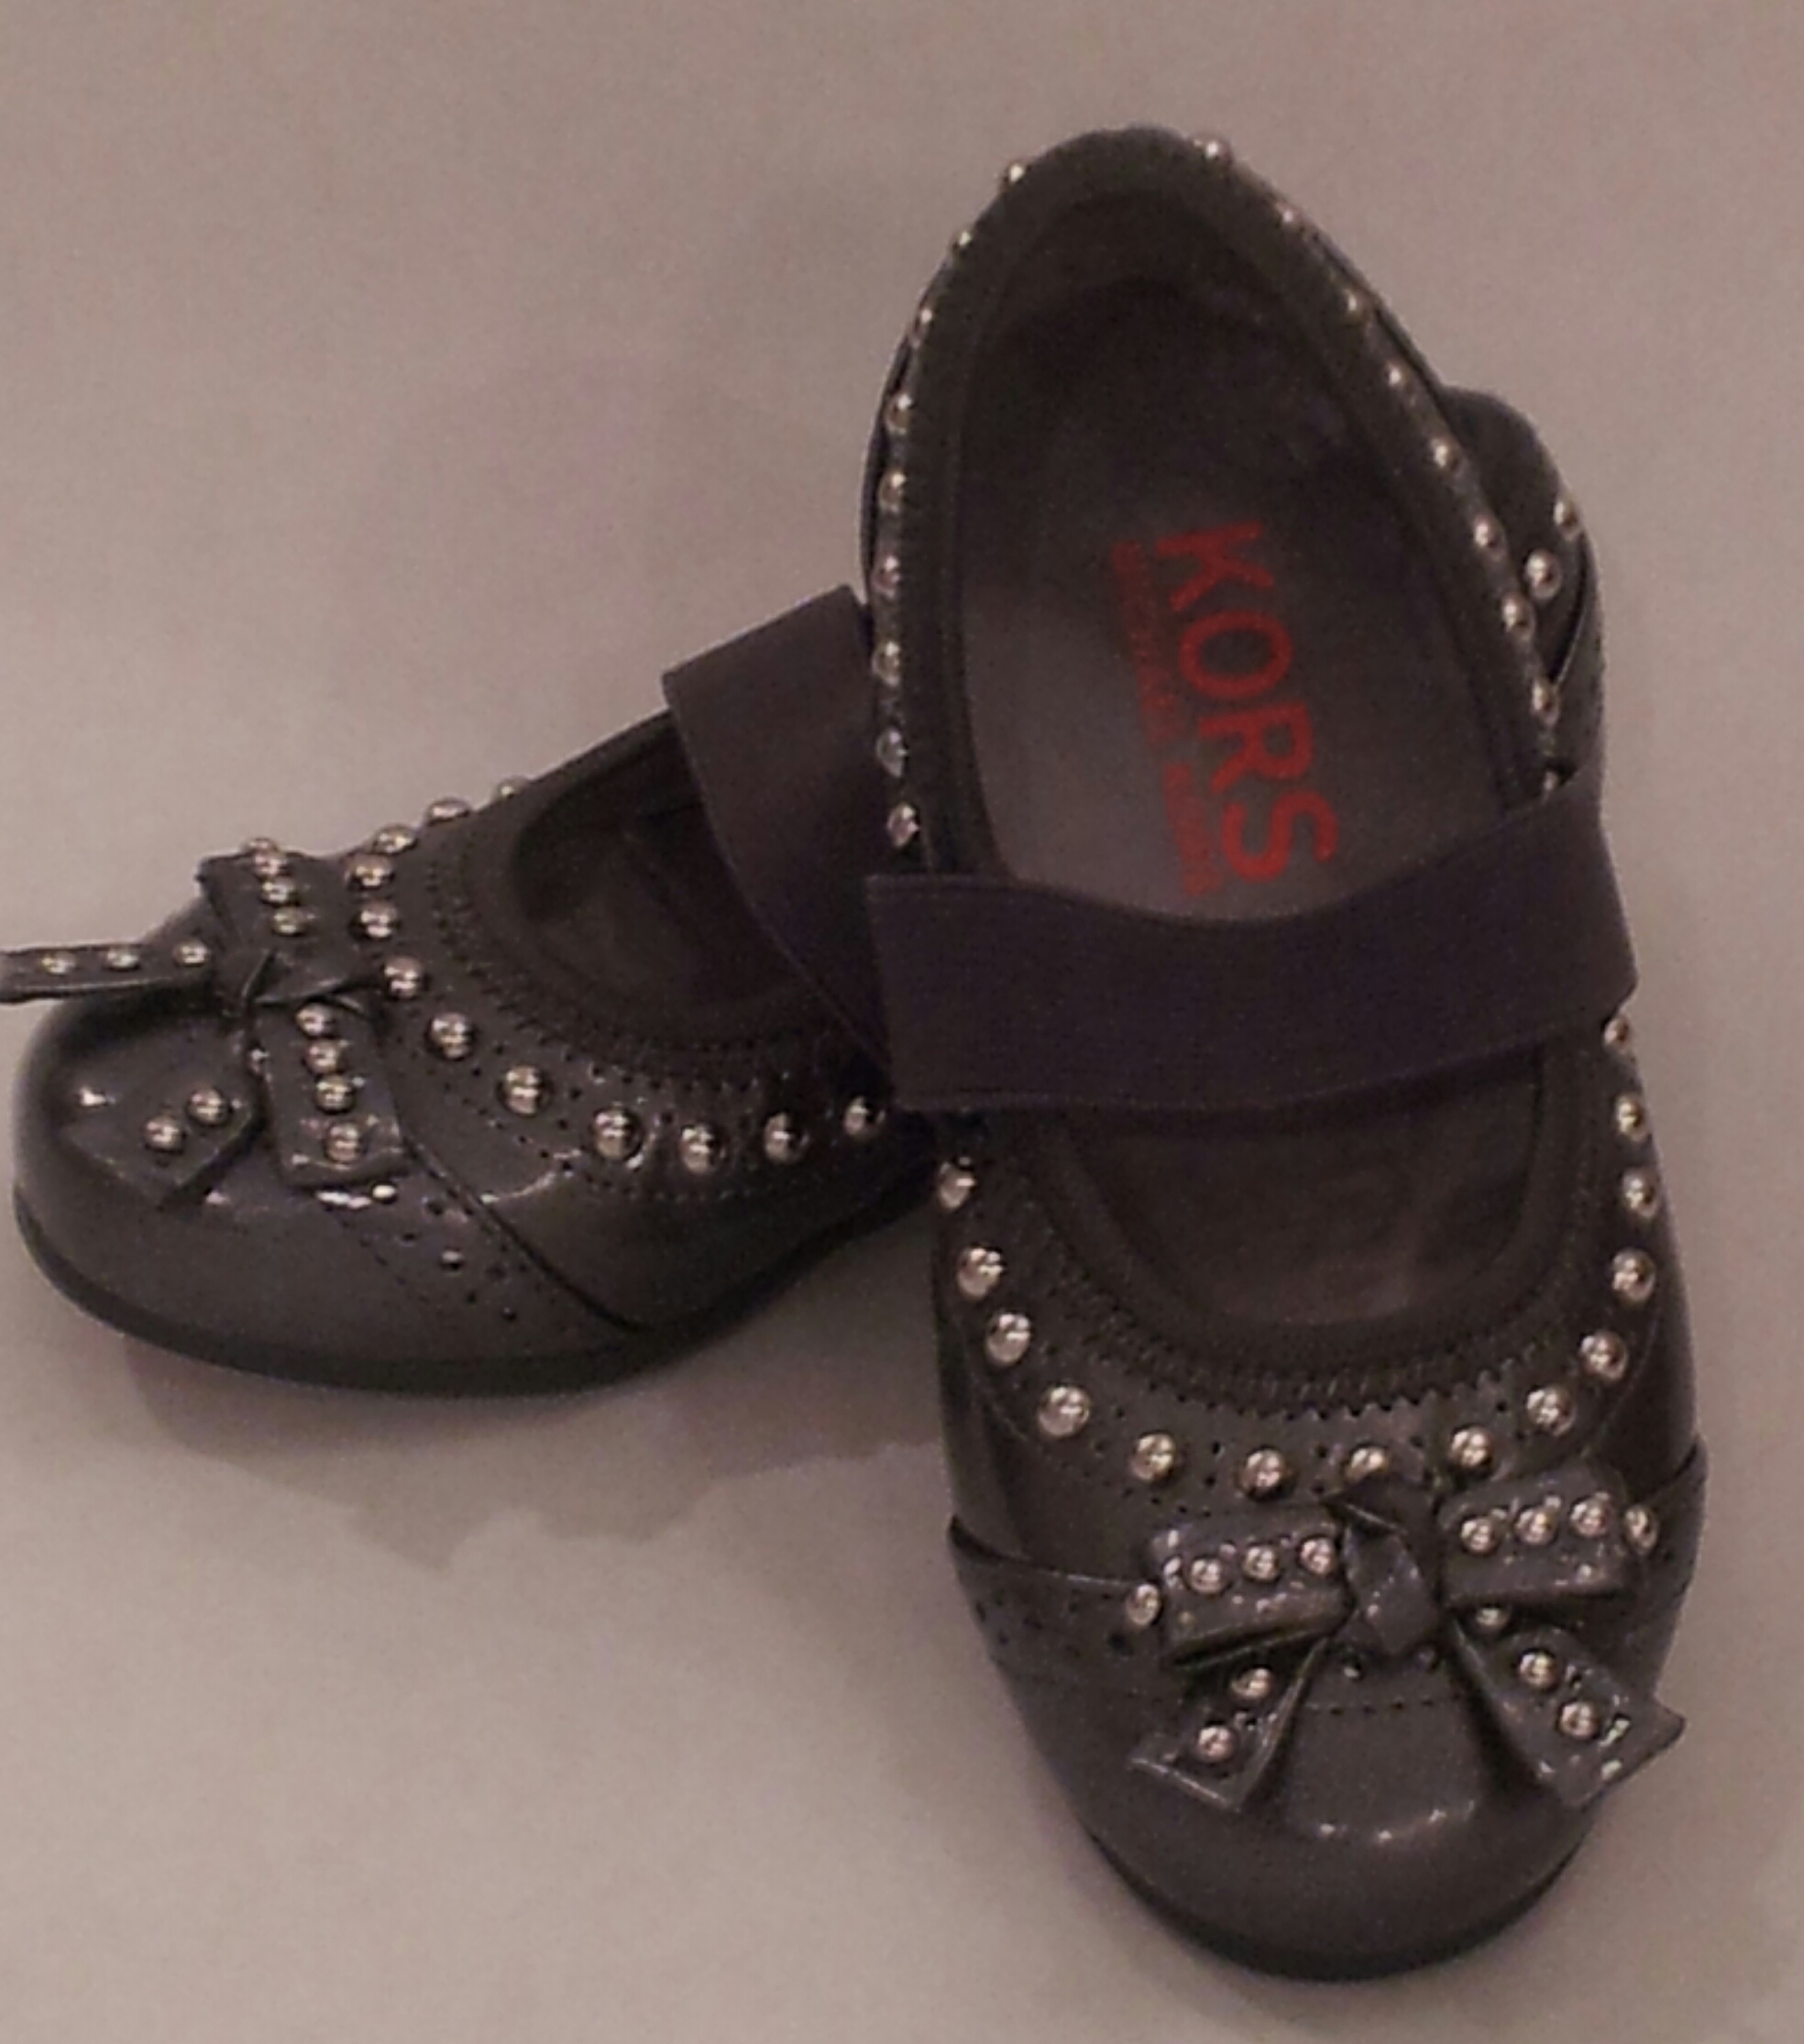 MICHAEL KORS studed charcoal toddler shoes 8T